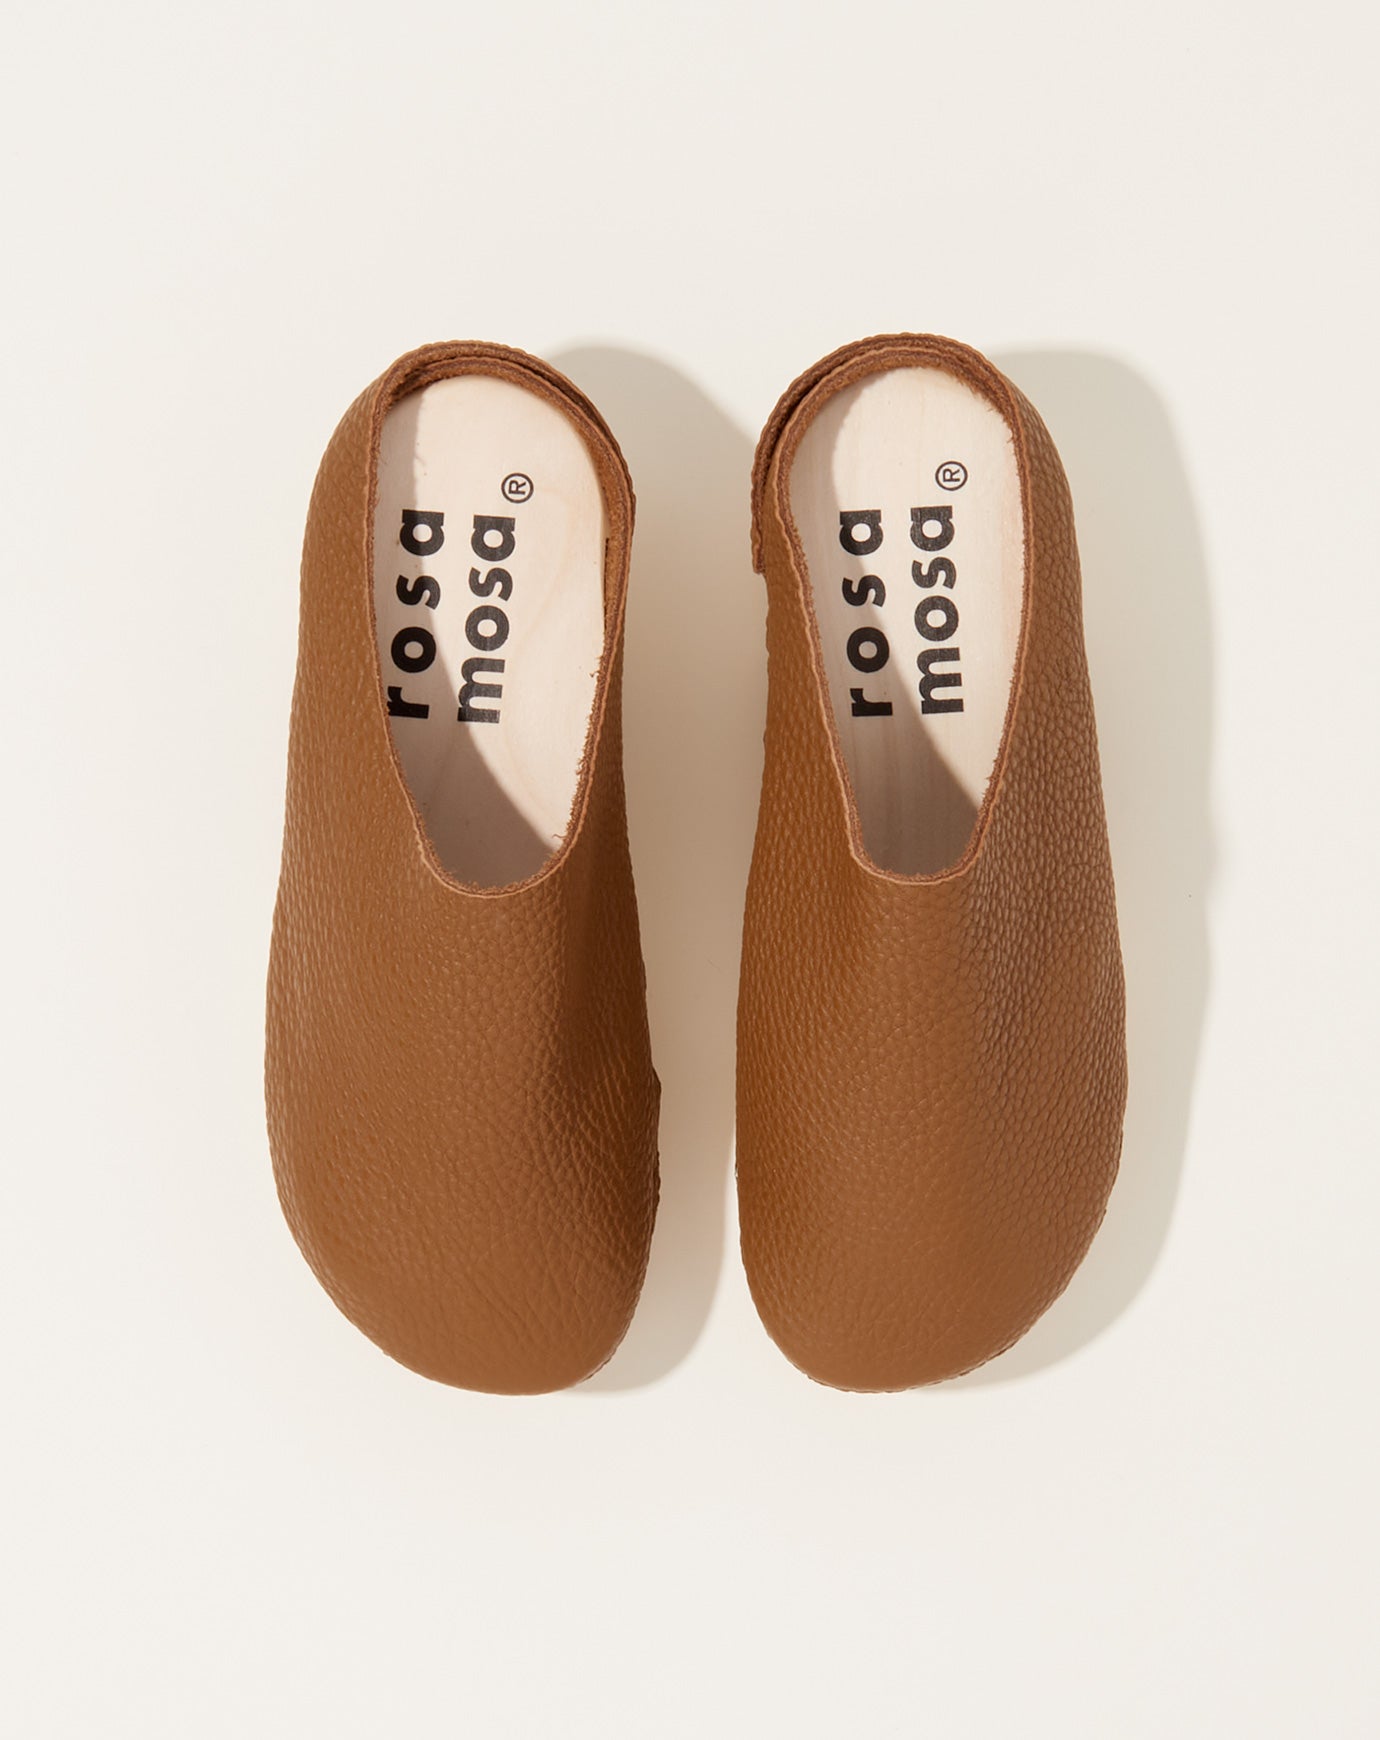 Rosa Mosa Leo Clog in Brown